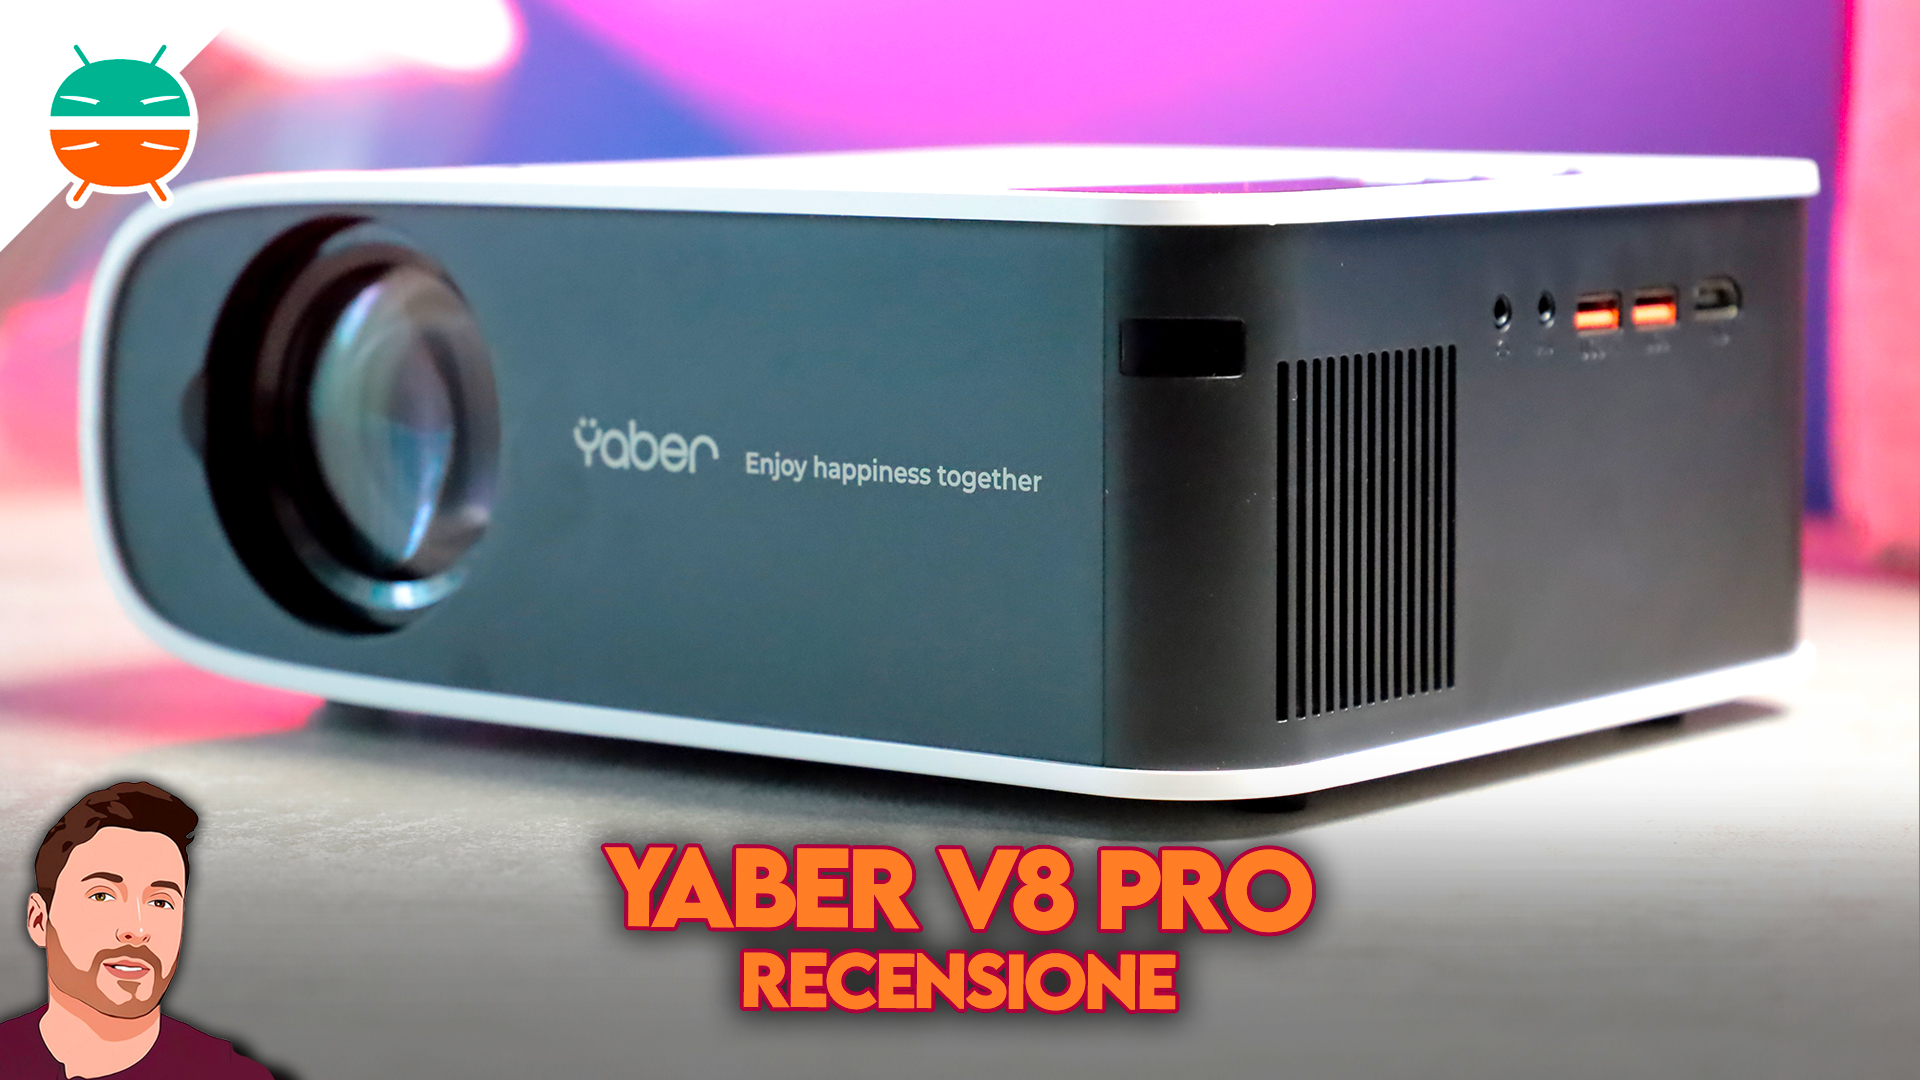 Yaber V8 Pro review: an excellent economic projector - GizChina.it